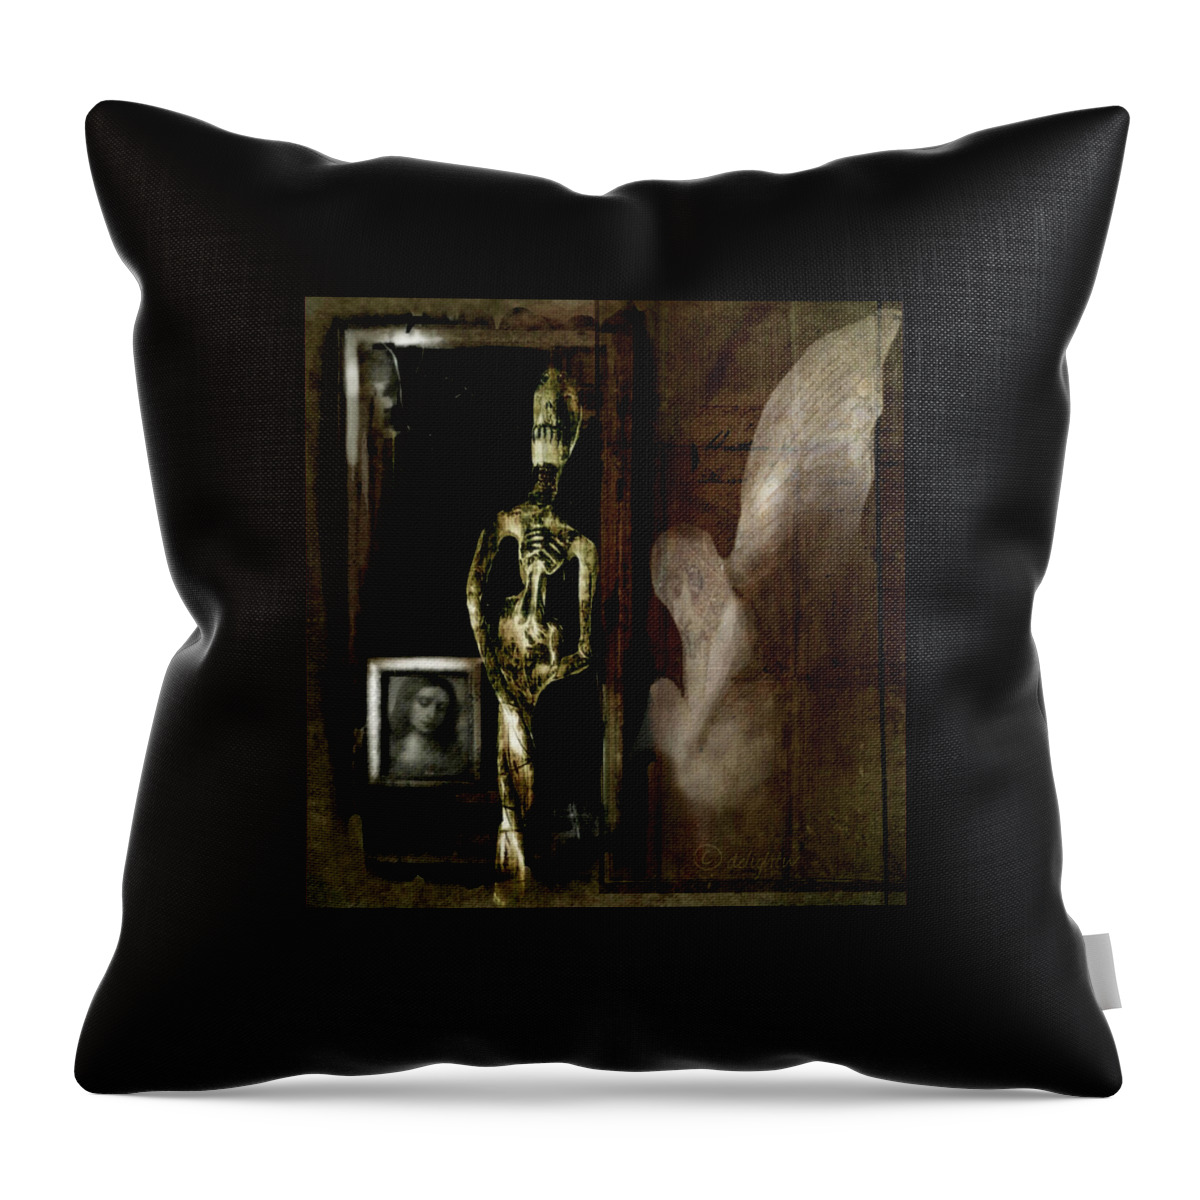 Dark Art Throw Pillow featuring the digital art Angels Among Us by Delight Worthyn